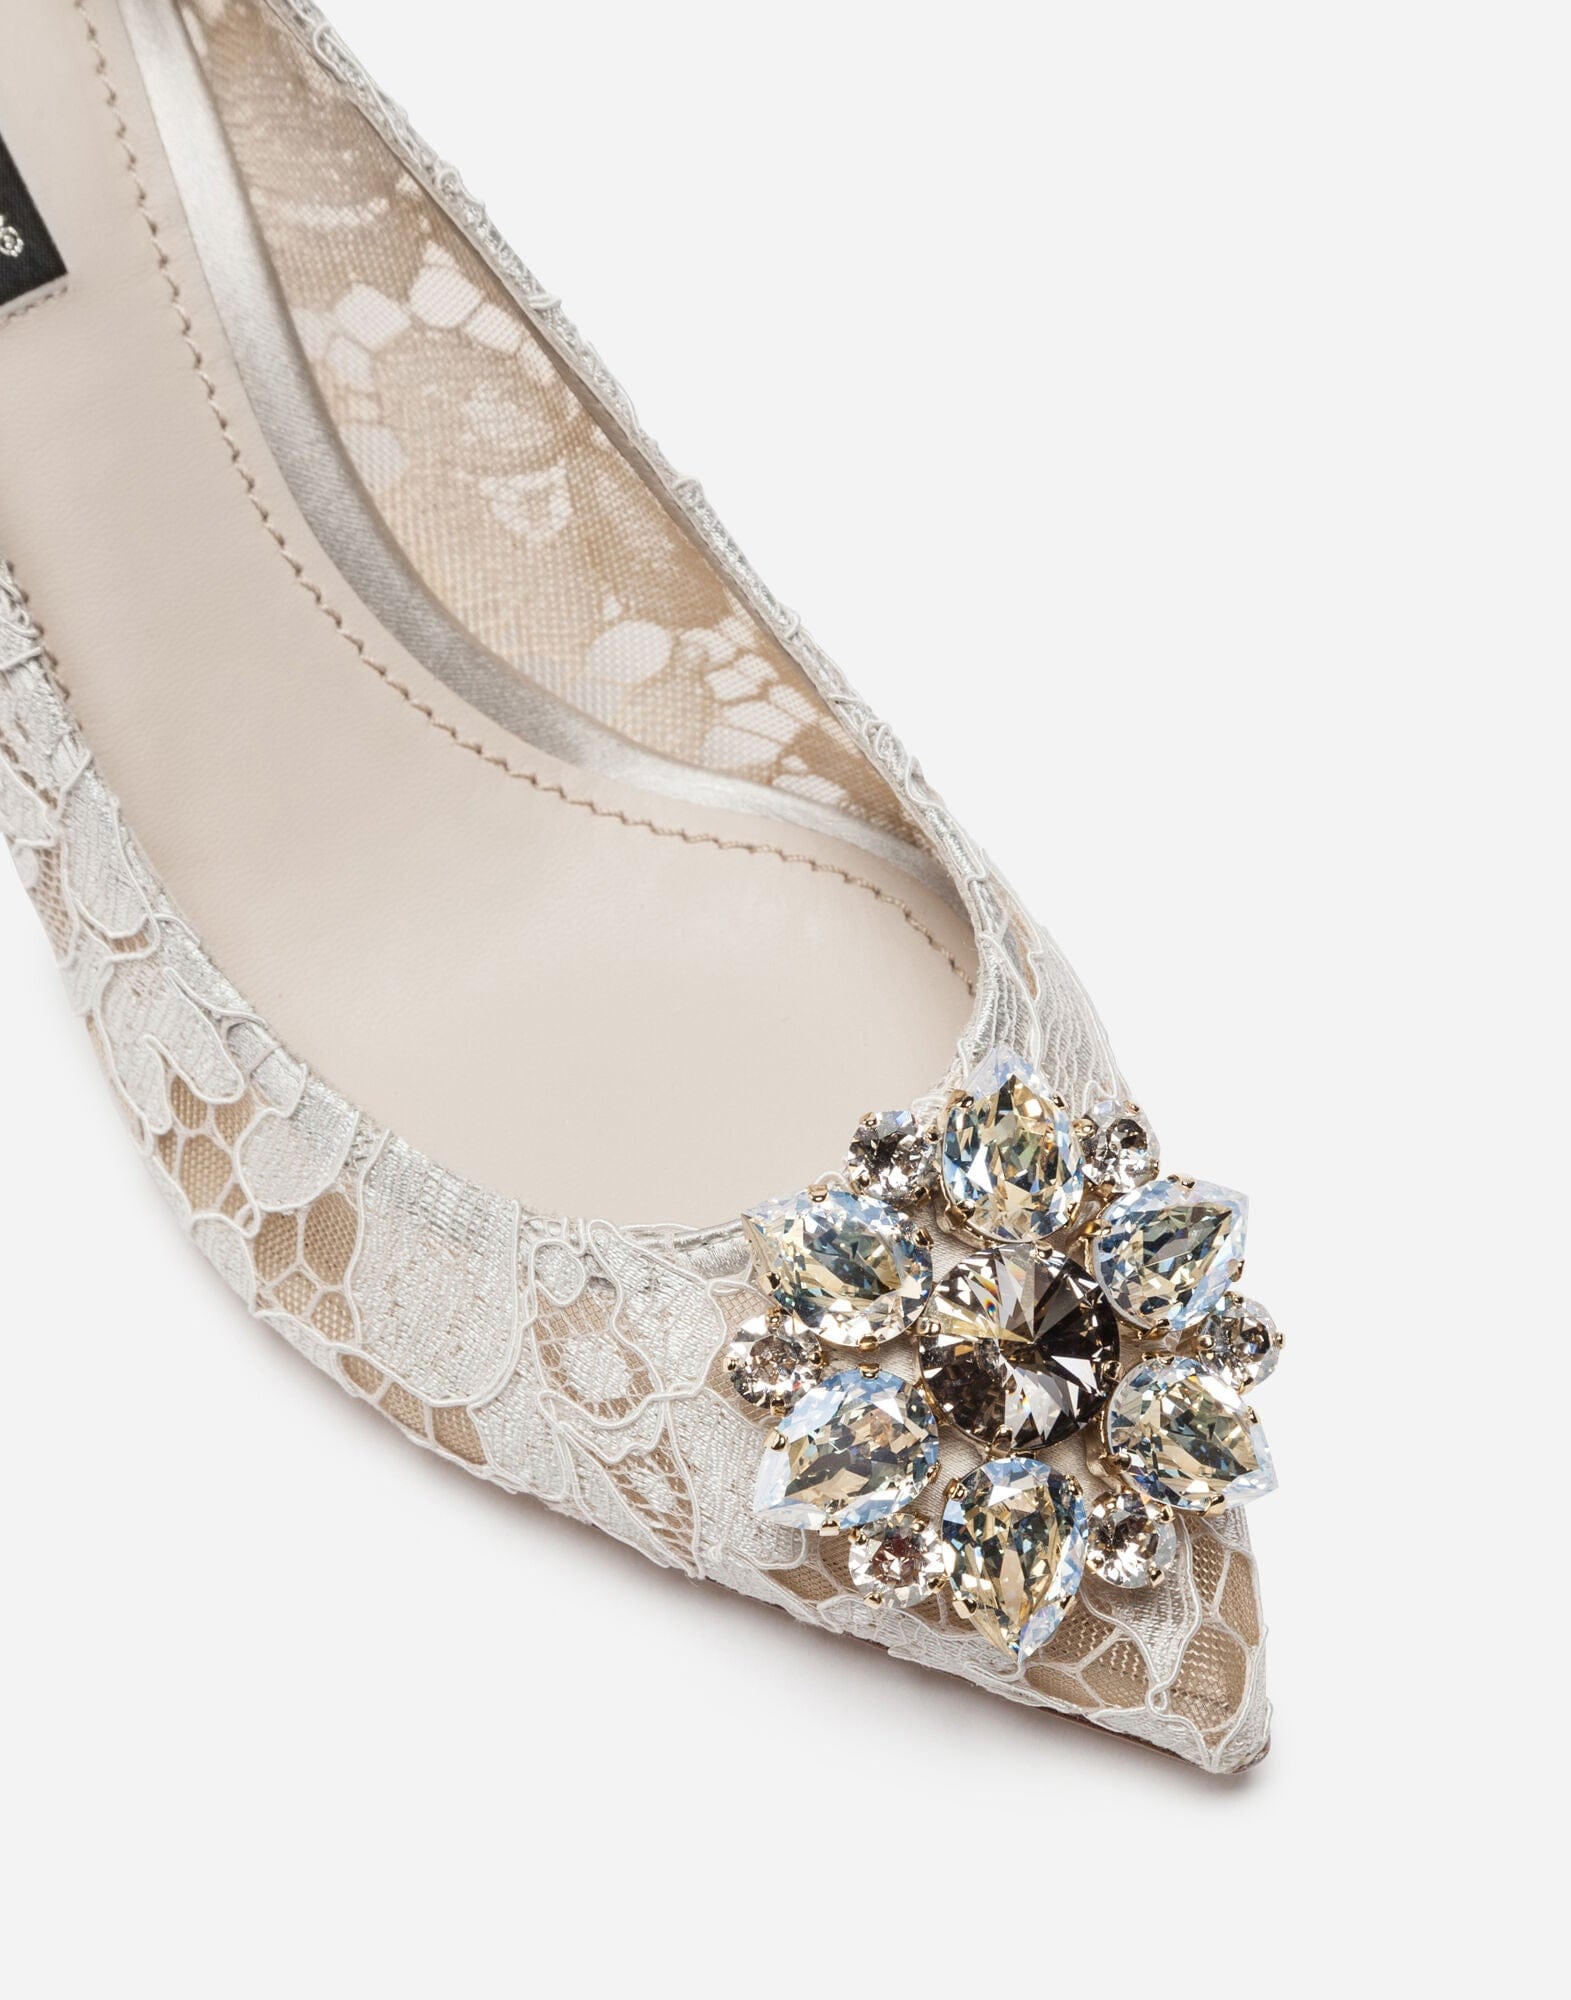 Dolce & Gabbana Pump In Taormina Lace With Crystals